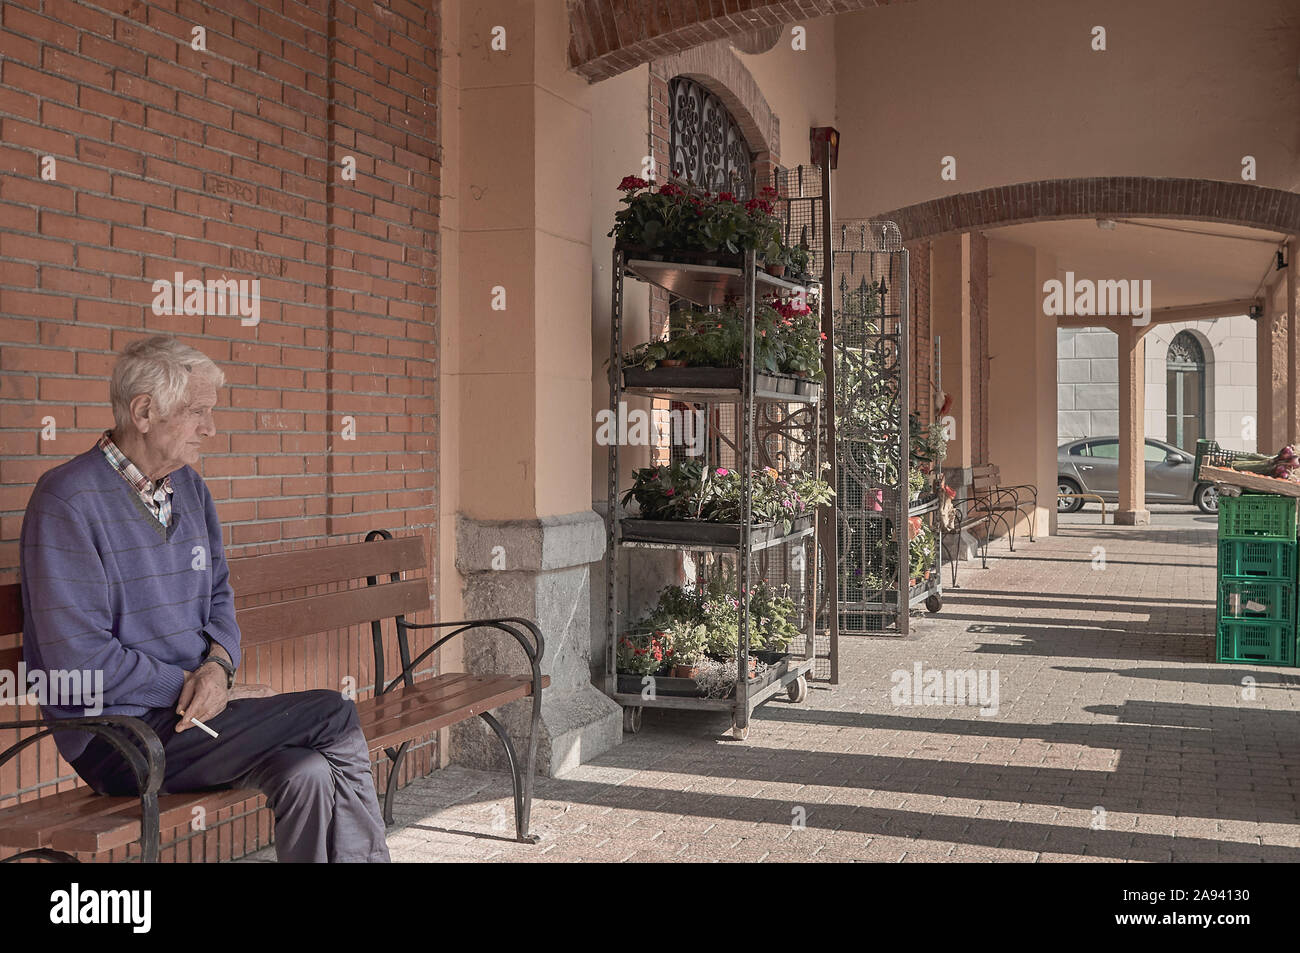 Old man with a cigarette off in his hand thoughtfully sitting on a bench in the porch of a market with a shelf full of flower trays, Laredo, Cantabria Stock Photo